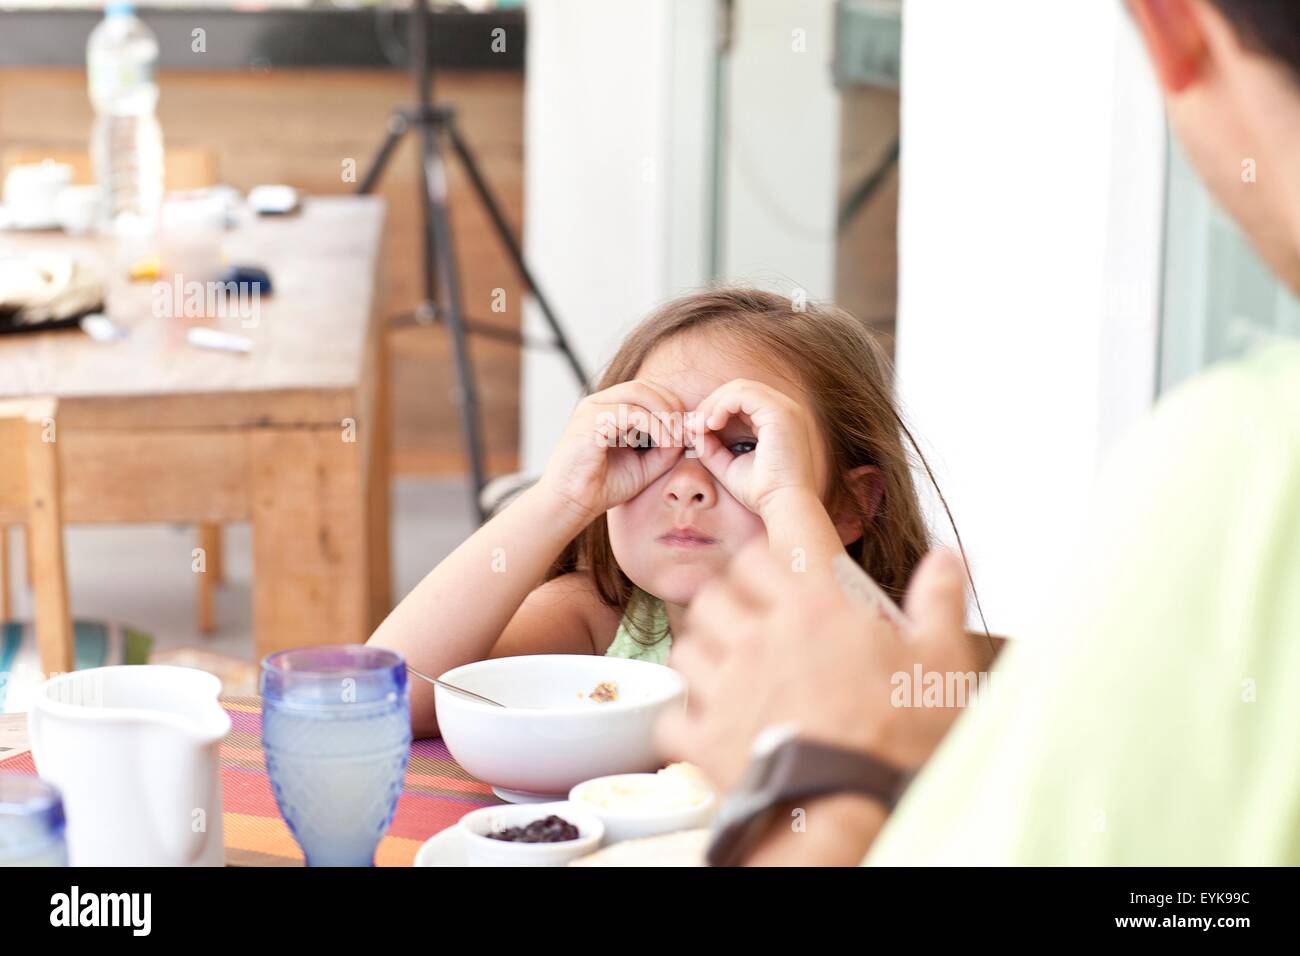 Father and daughter sitting at breakfast table, daughter making binoculars from fingers Stock Photo